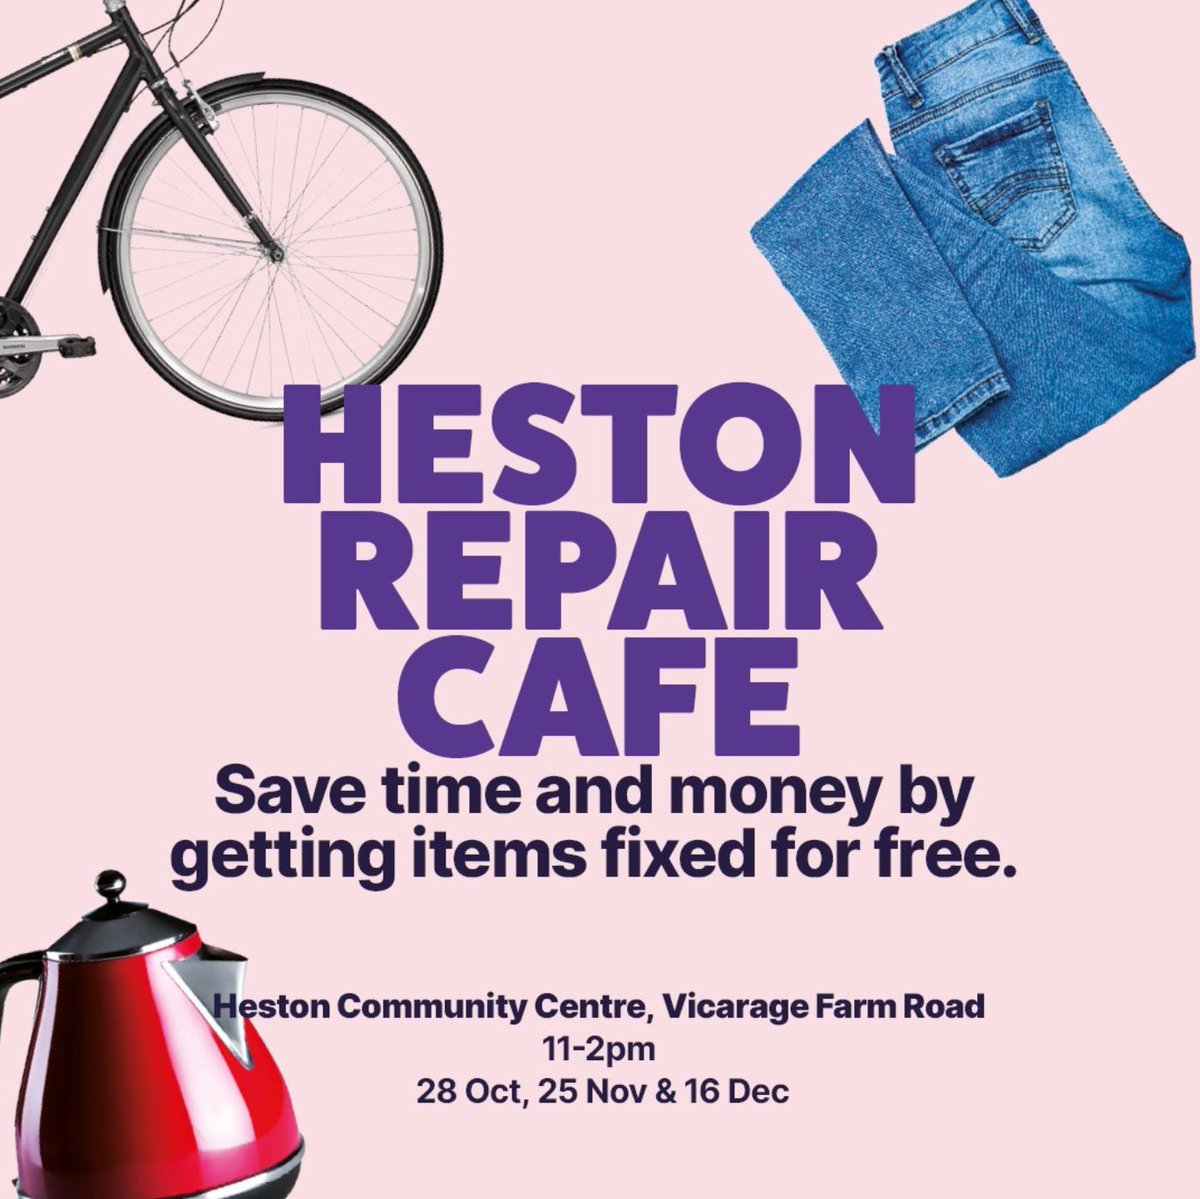 Would you like to save time/££ by getting items fixed for free? @HestonRepairCaf runs repair workshops each month. ➡️Bring your broken bike, clothes, small appliances & learn how to fix them yourself. Next event: Sat 16 Dec, 11-2pm #RepairDontReplace #Sustainability